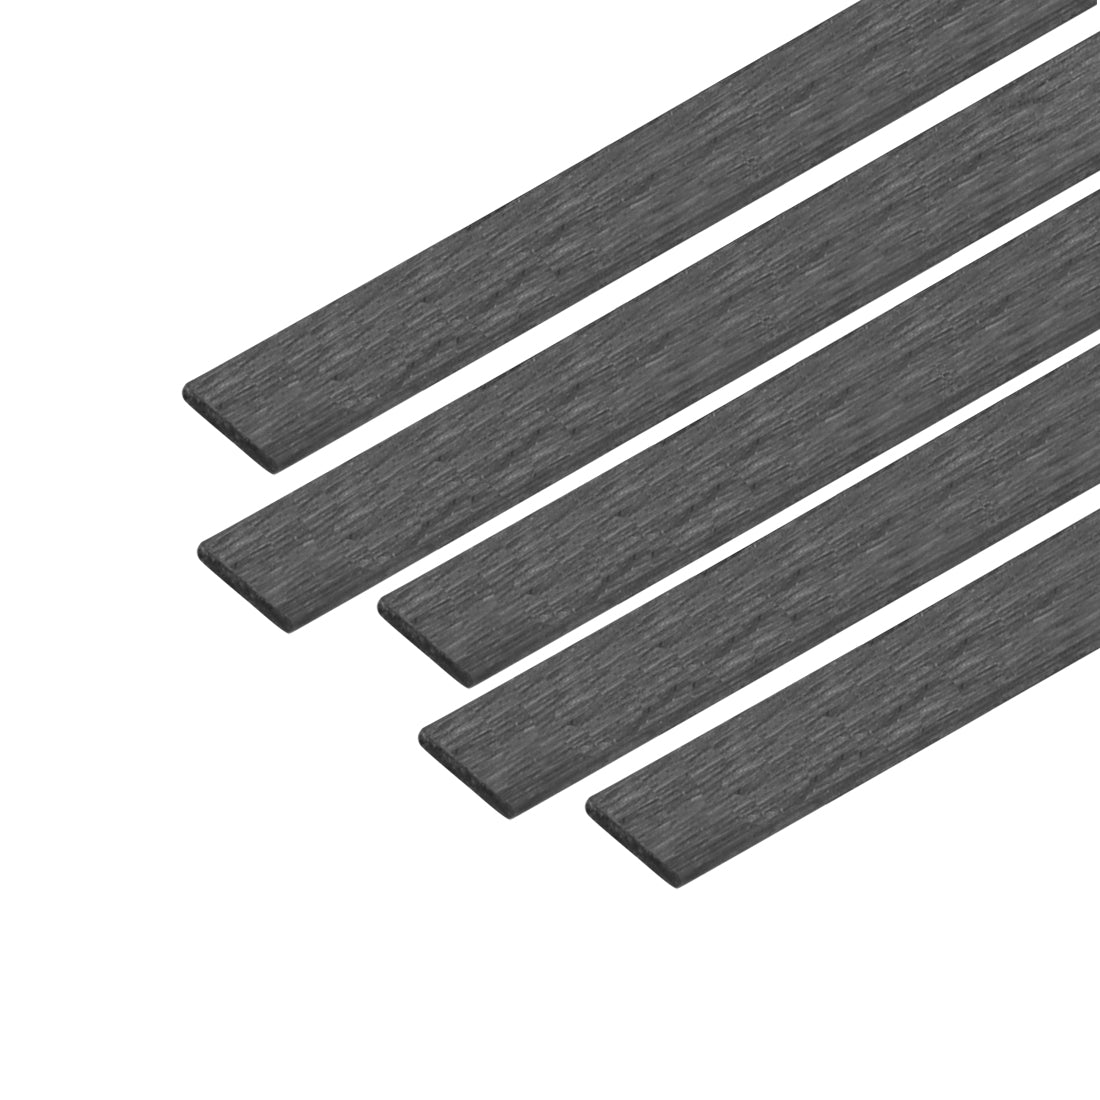 uxcell Uxcell Carbon Fiber Strip Bars 0.5x3mm 400mm Length Pultruded Carbon Fiber Strips for Kites, RC Airplane 5 Pcs